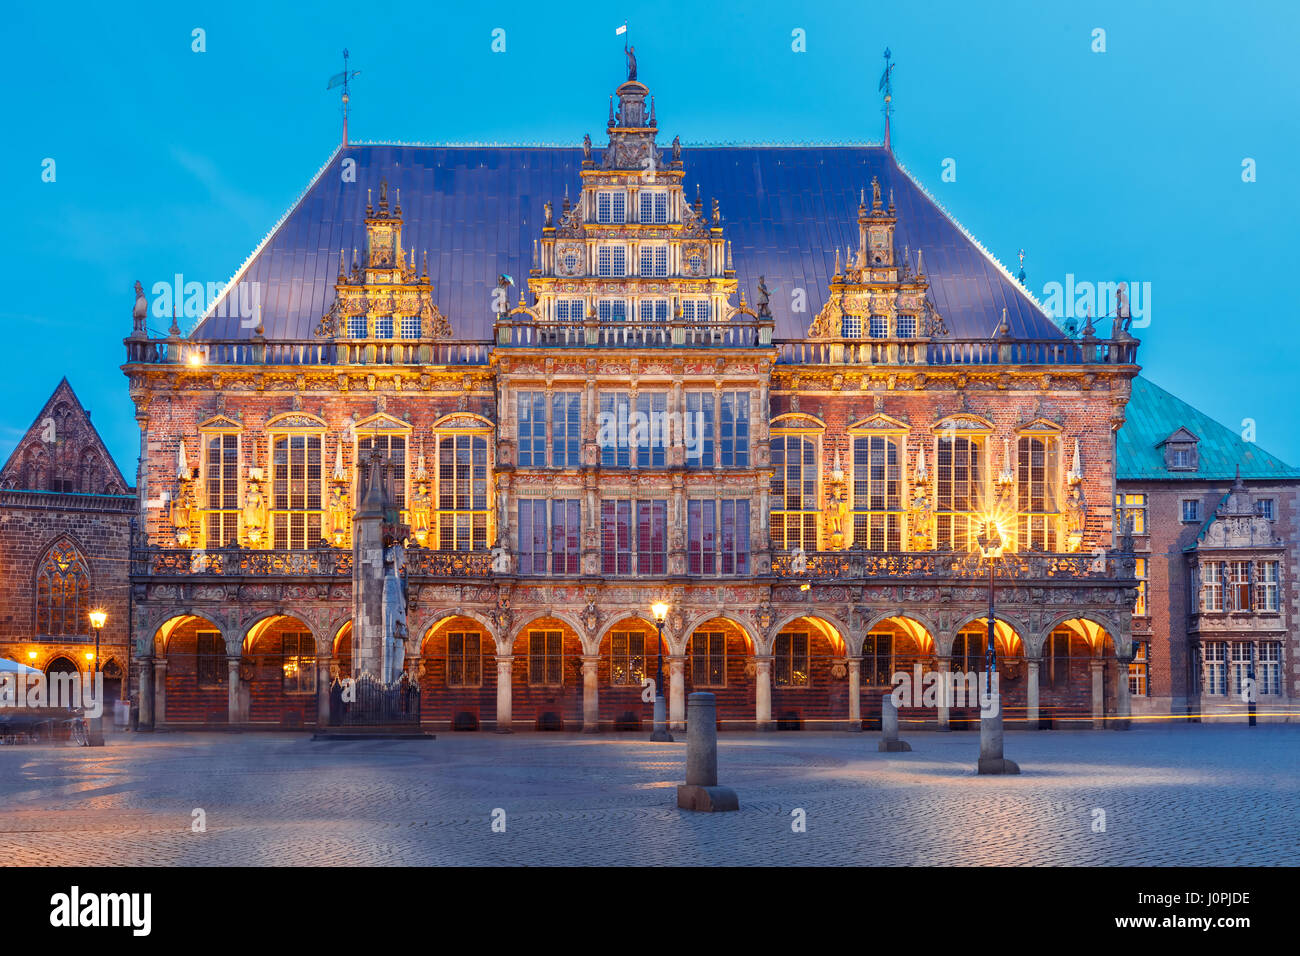 City Hall on Market Square in Bremen, Germany Stock Photo